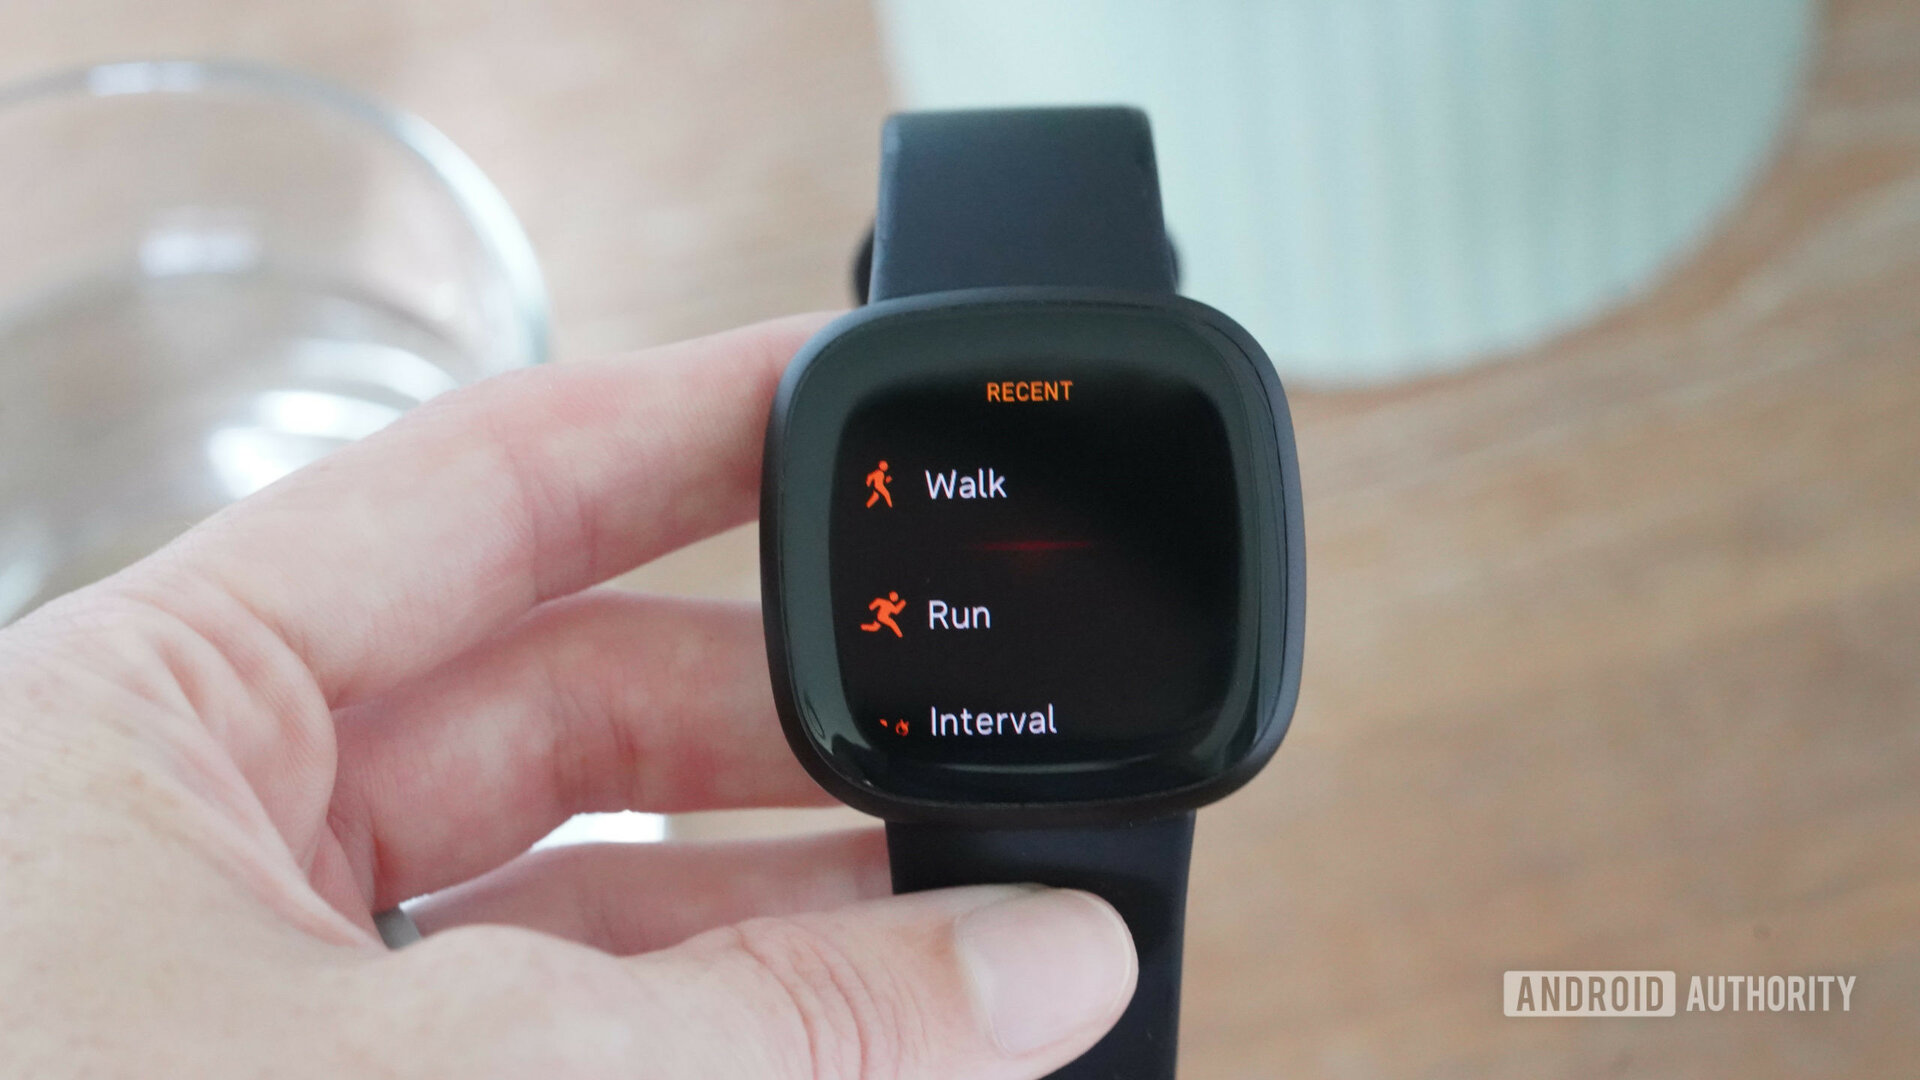 A user reviews activity options on their Fitbit Versa 3.